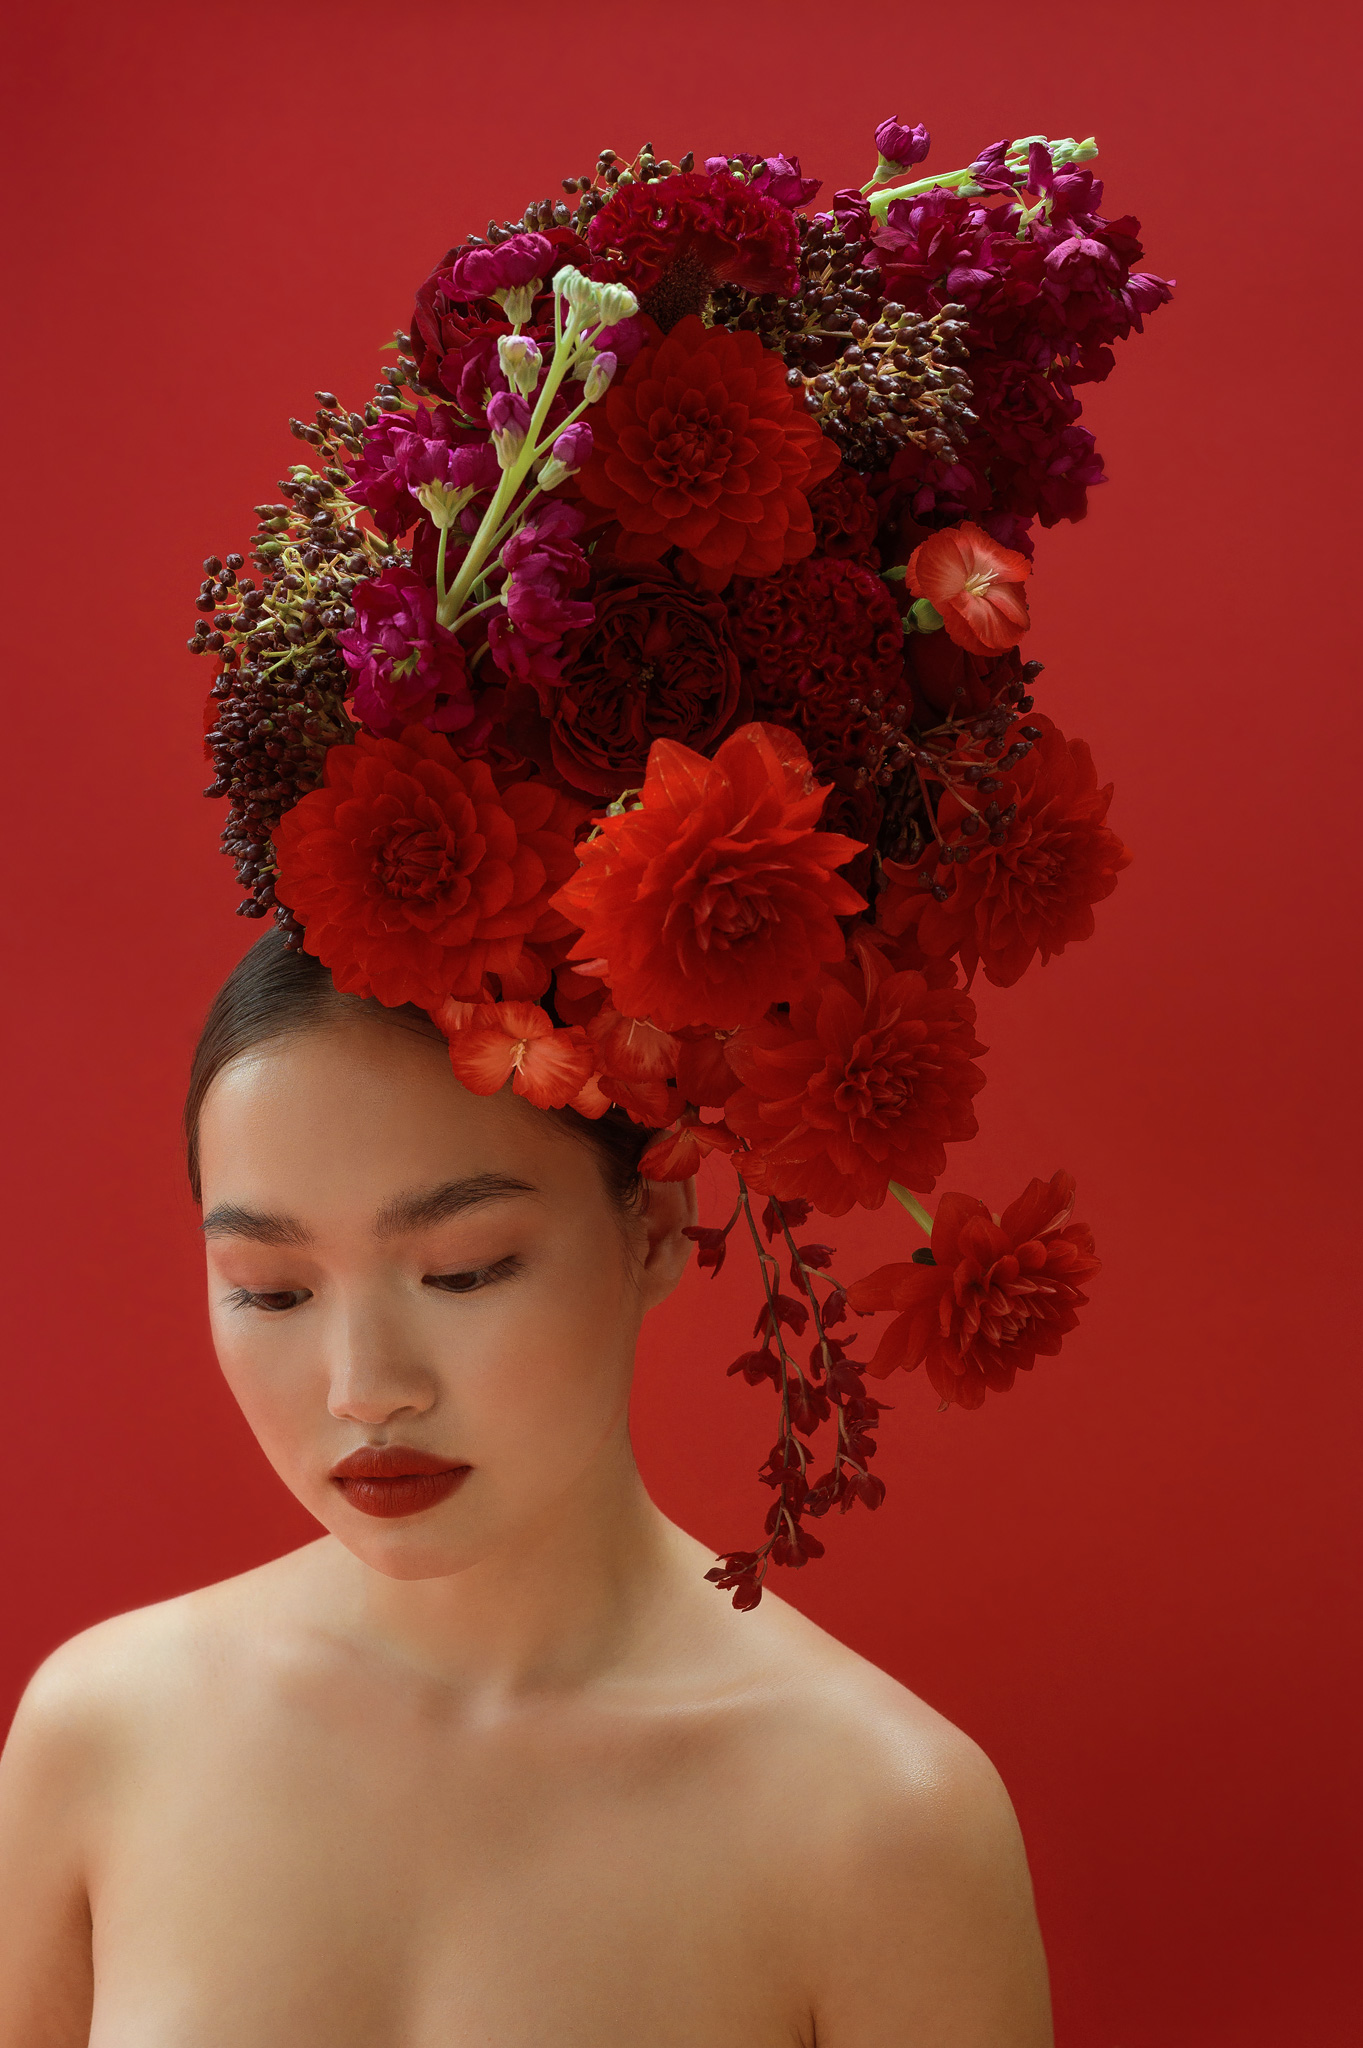 Flowers for justice and equality - Katya Hutter - blogger on thursd - asian model with flower headpiece